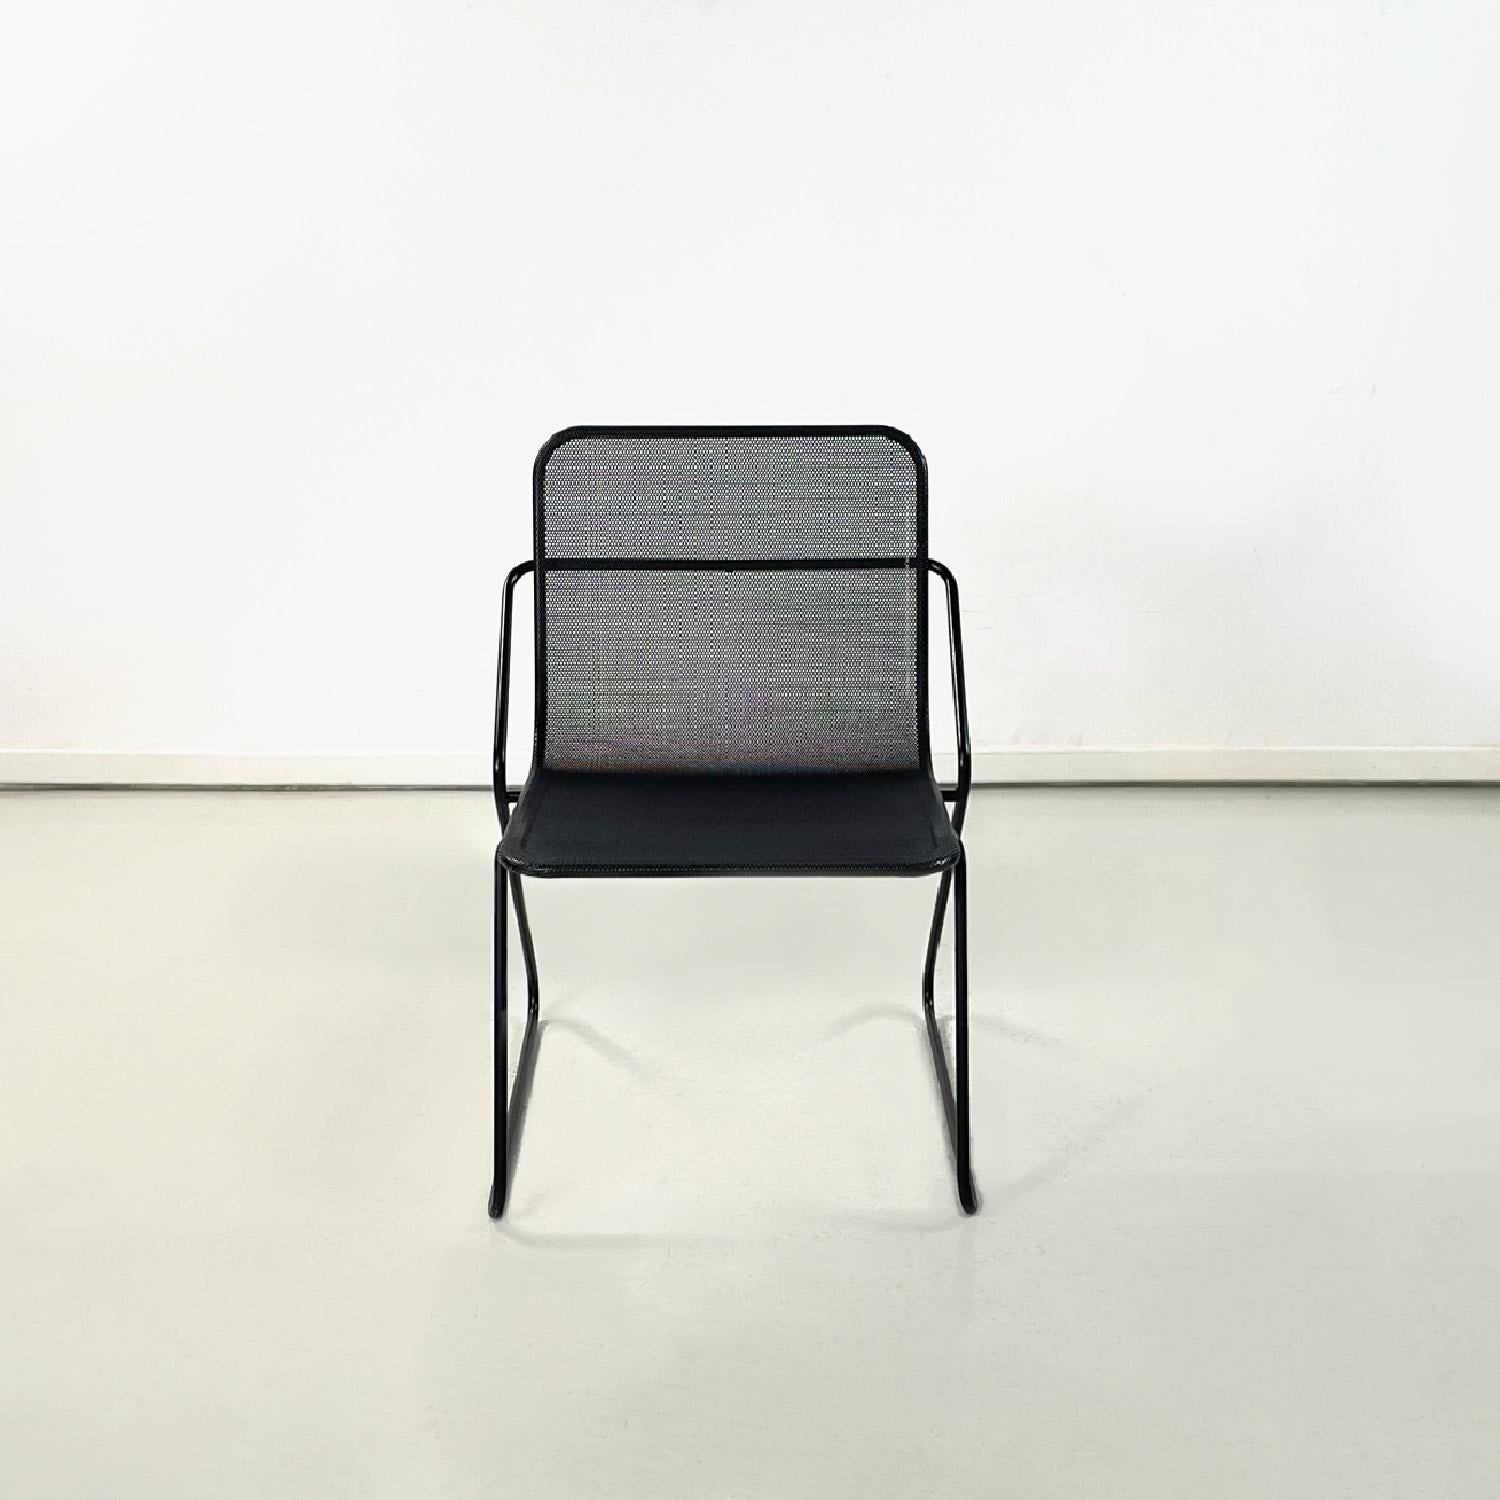 Italian modern metal rod and perforated metal sheet black metal chair, 1980s
Chair with a rectangular base in black painted metal rod. The structure is made up of a single metal rod that makes up the triangular shaped legs and the backrest